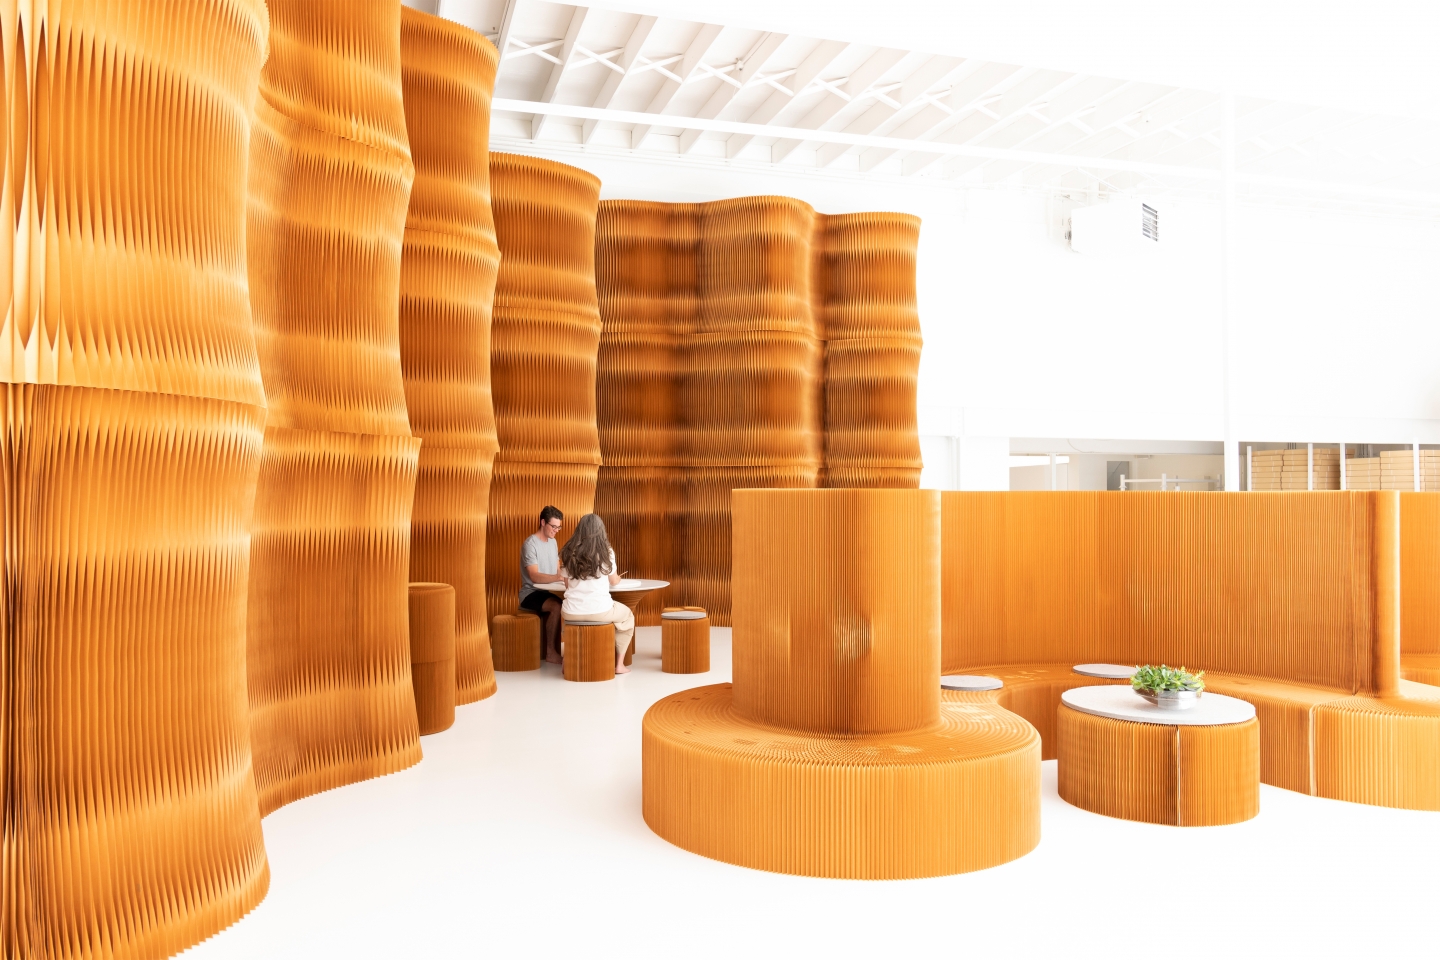 paper furniture exhibit at orgatec 2018 - molo's highbacked seating and paper softwall